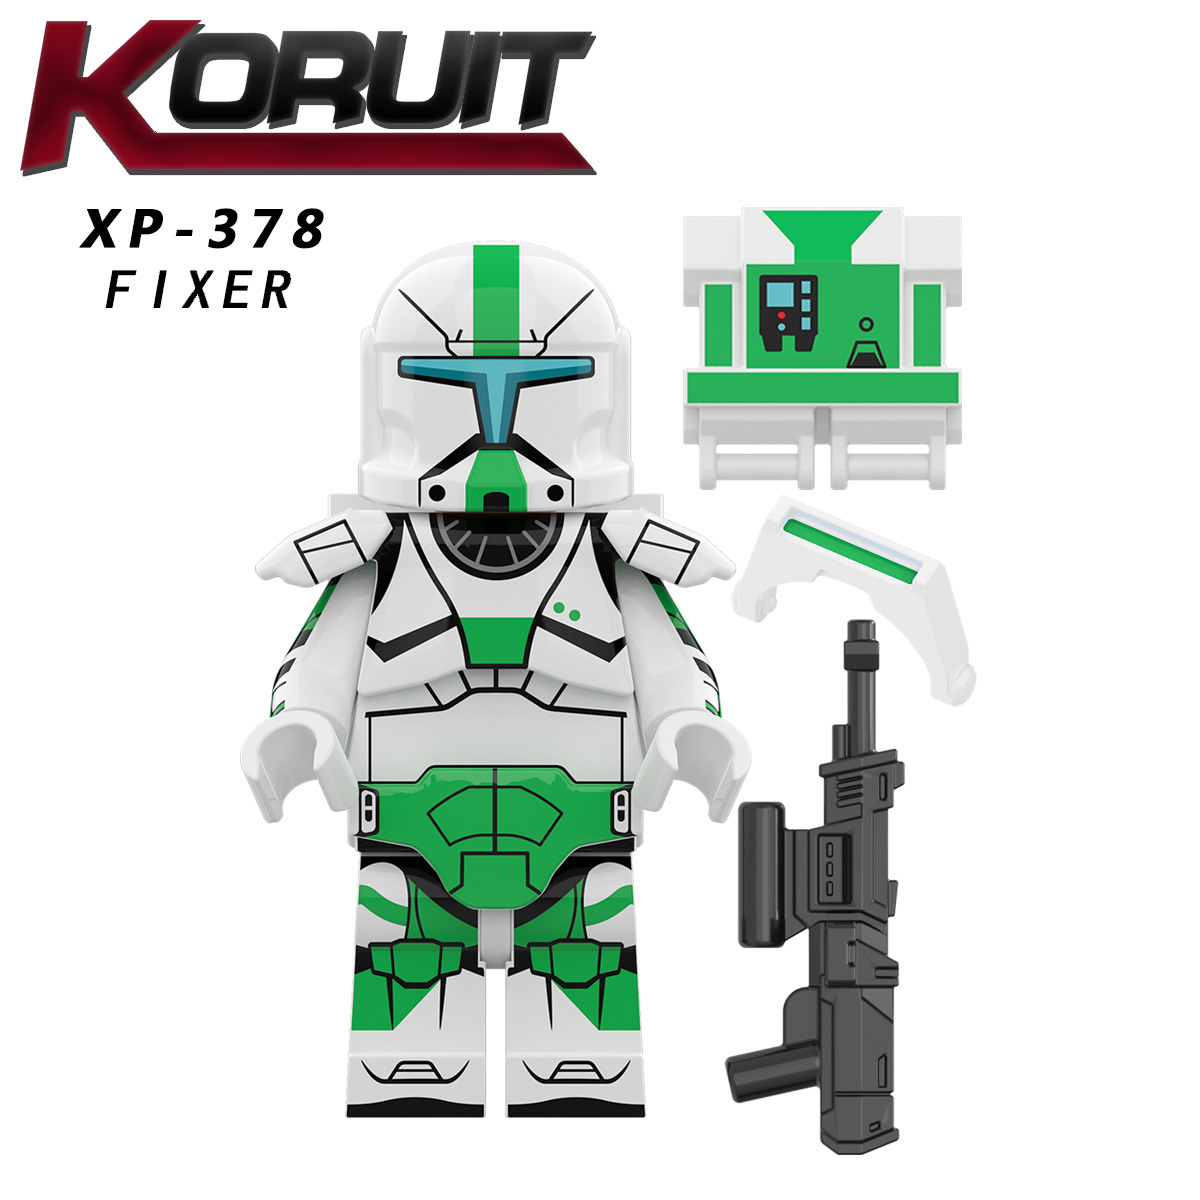 XP369 XP370 XP371 XP372 XP373 XP374 XP375 XP376 XP377 XP378 XP379 XP380 Star Wars Famous Movie Series Characters Bricks Building Blocks Action Figures Educational Toys For Children's Gifts KT1048 KT1049